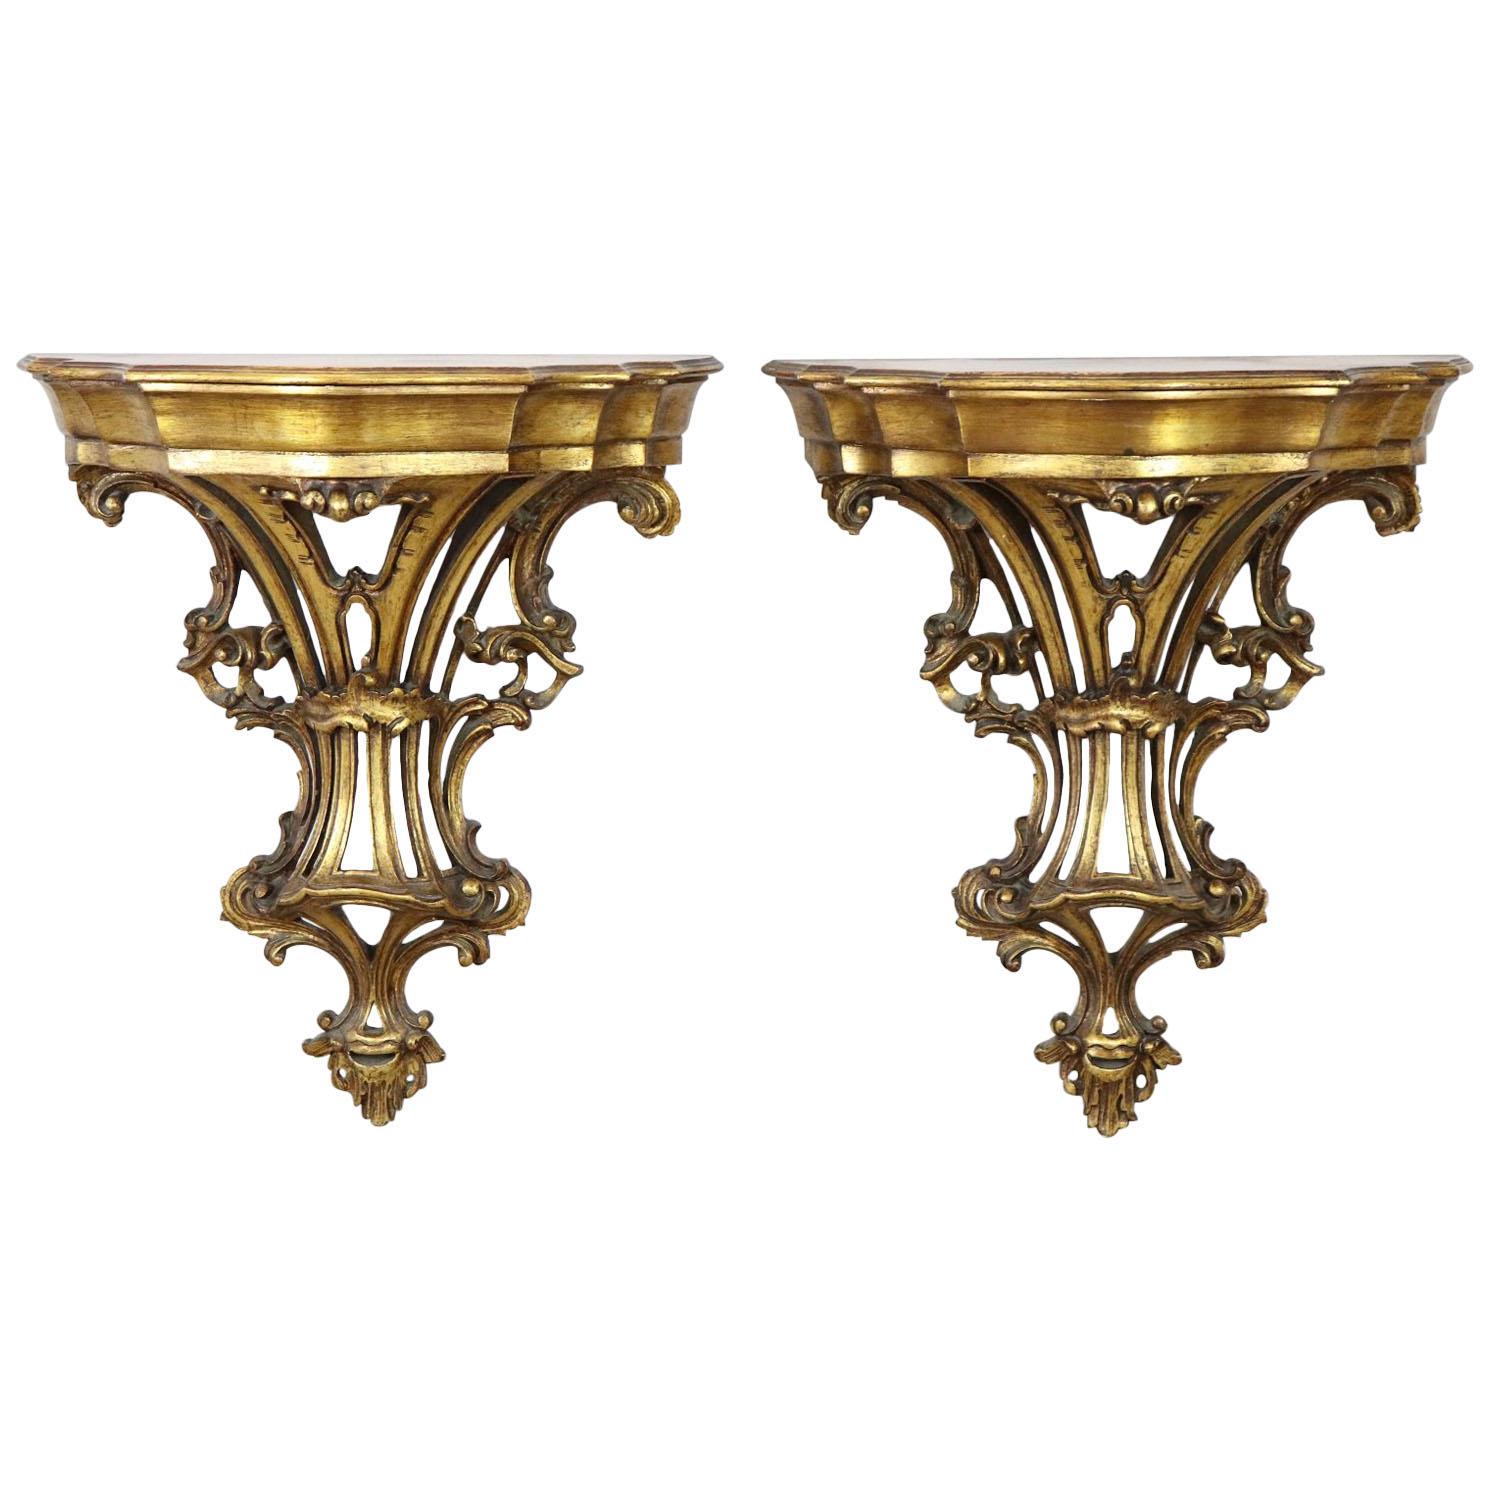 20th Century Italian Baroque Style Carved and Gilded Wood Pair of Nightstands